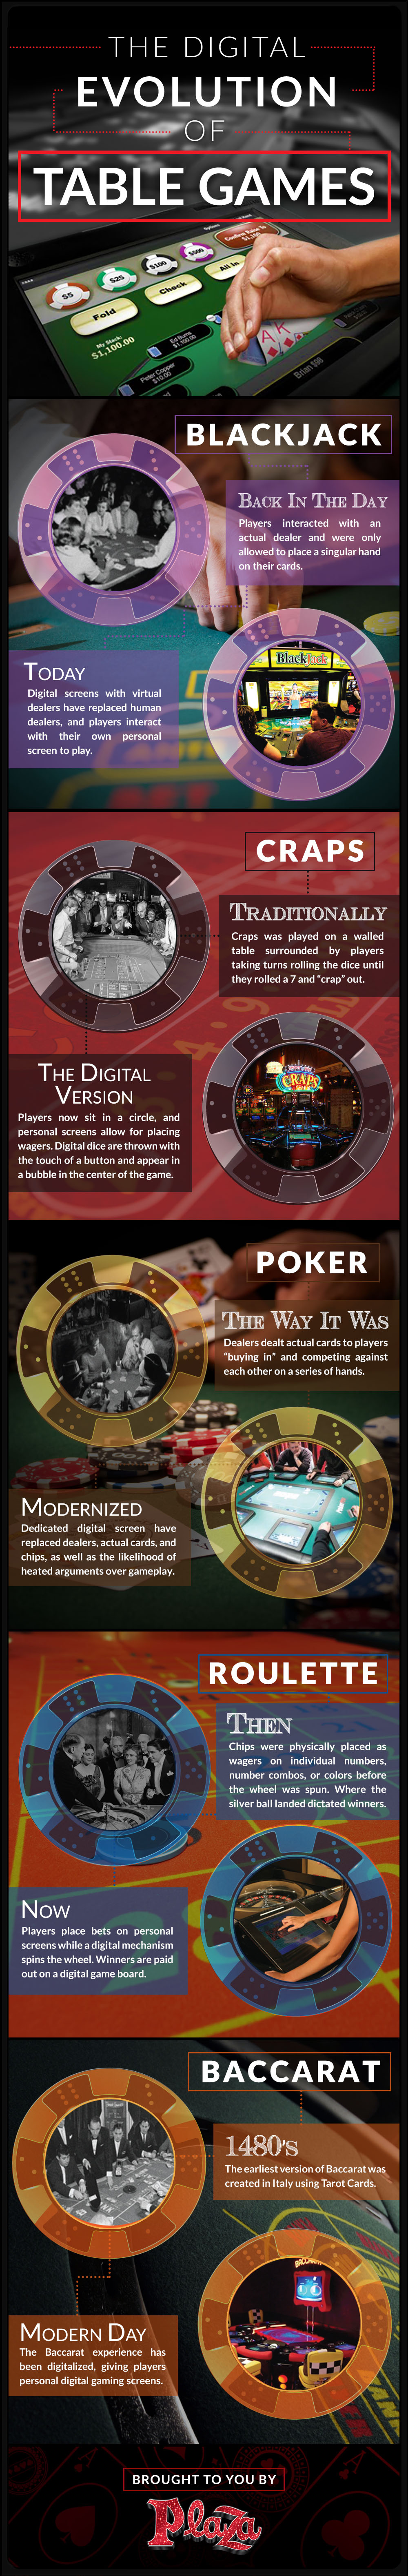 Casino Table Games: The Digital Evolution - Infographic